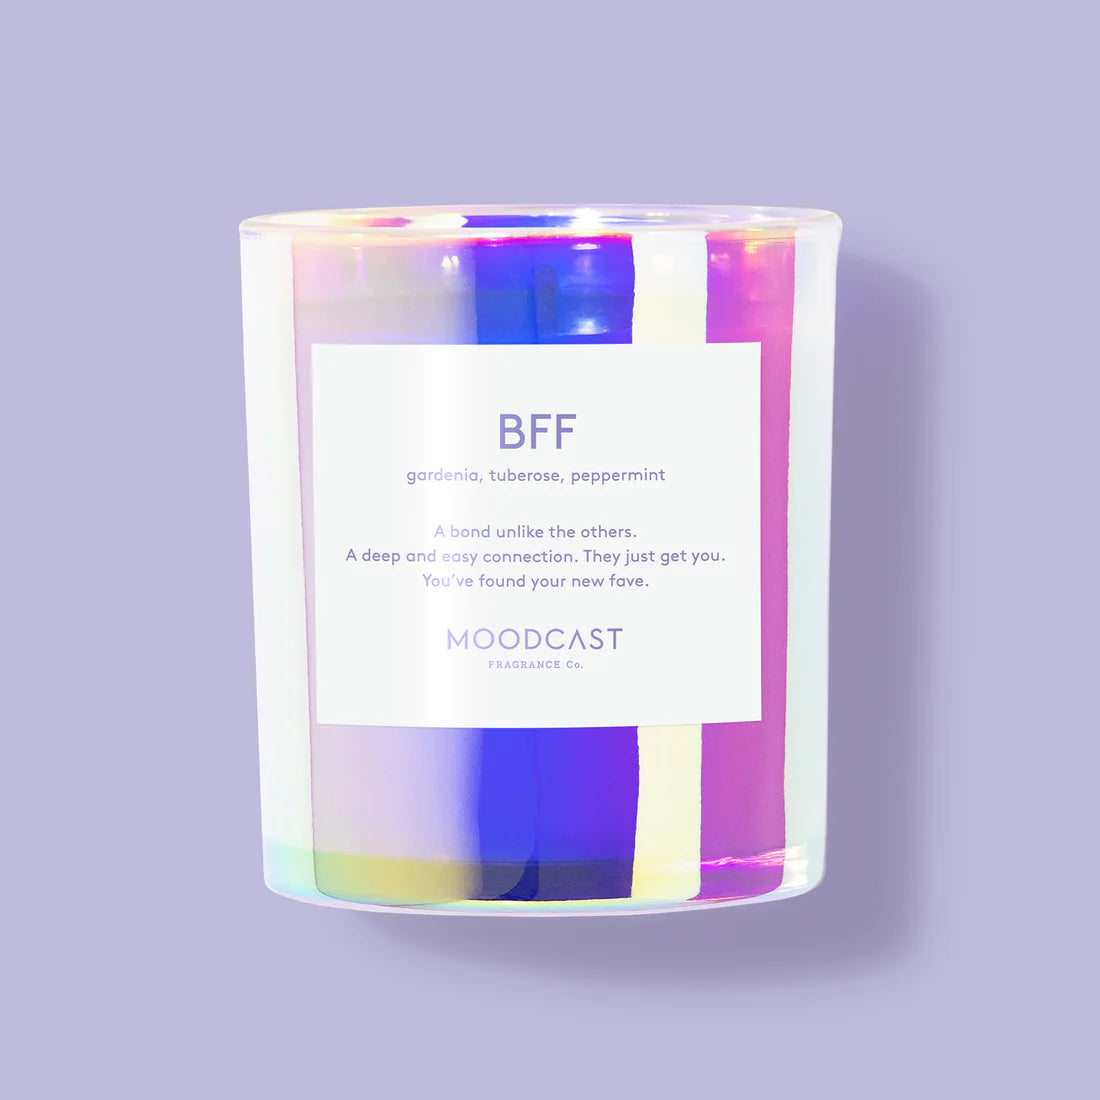 Moodcast Candle Iridescent 8oz Candles in BFF at Wrapsody